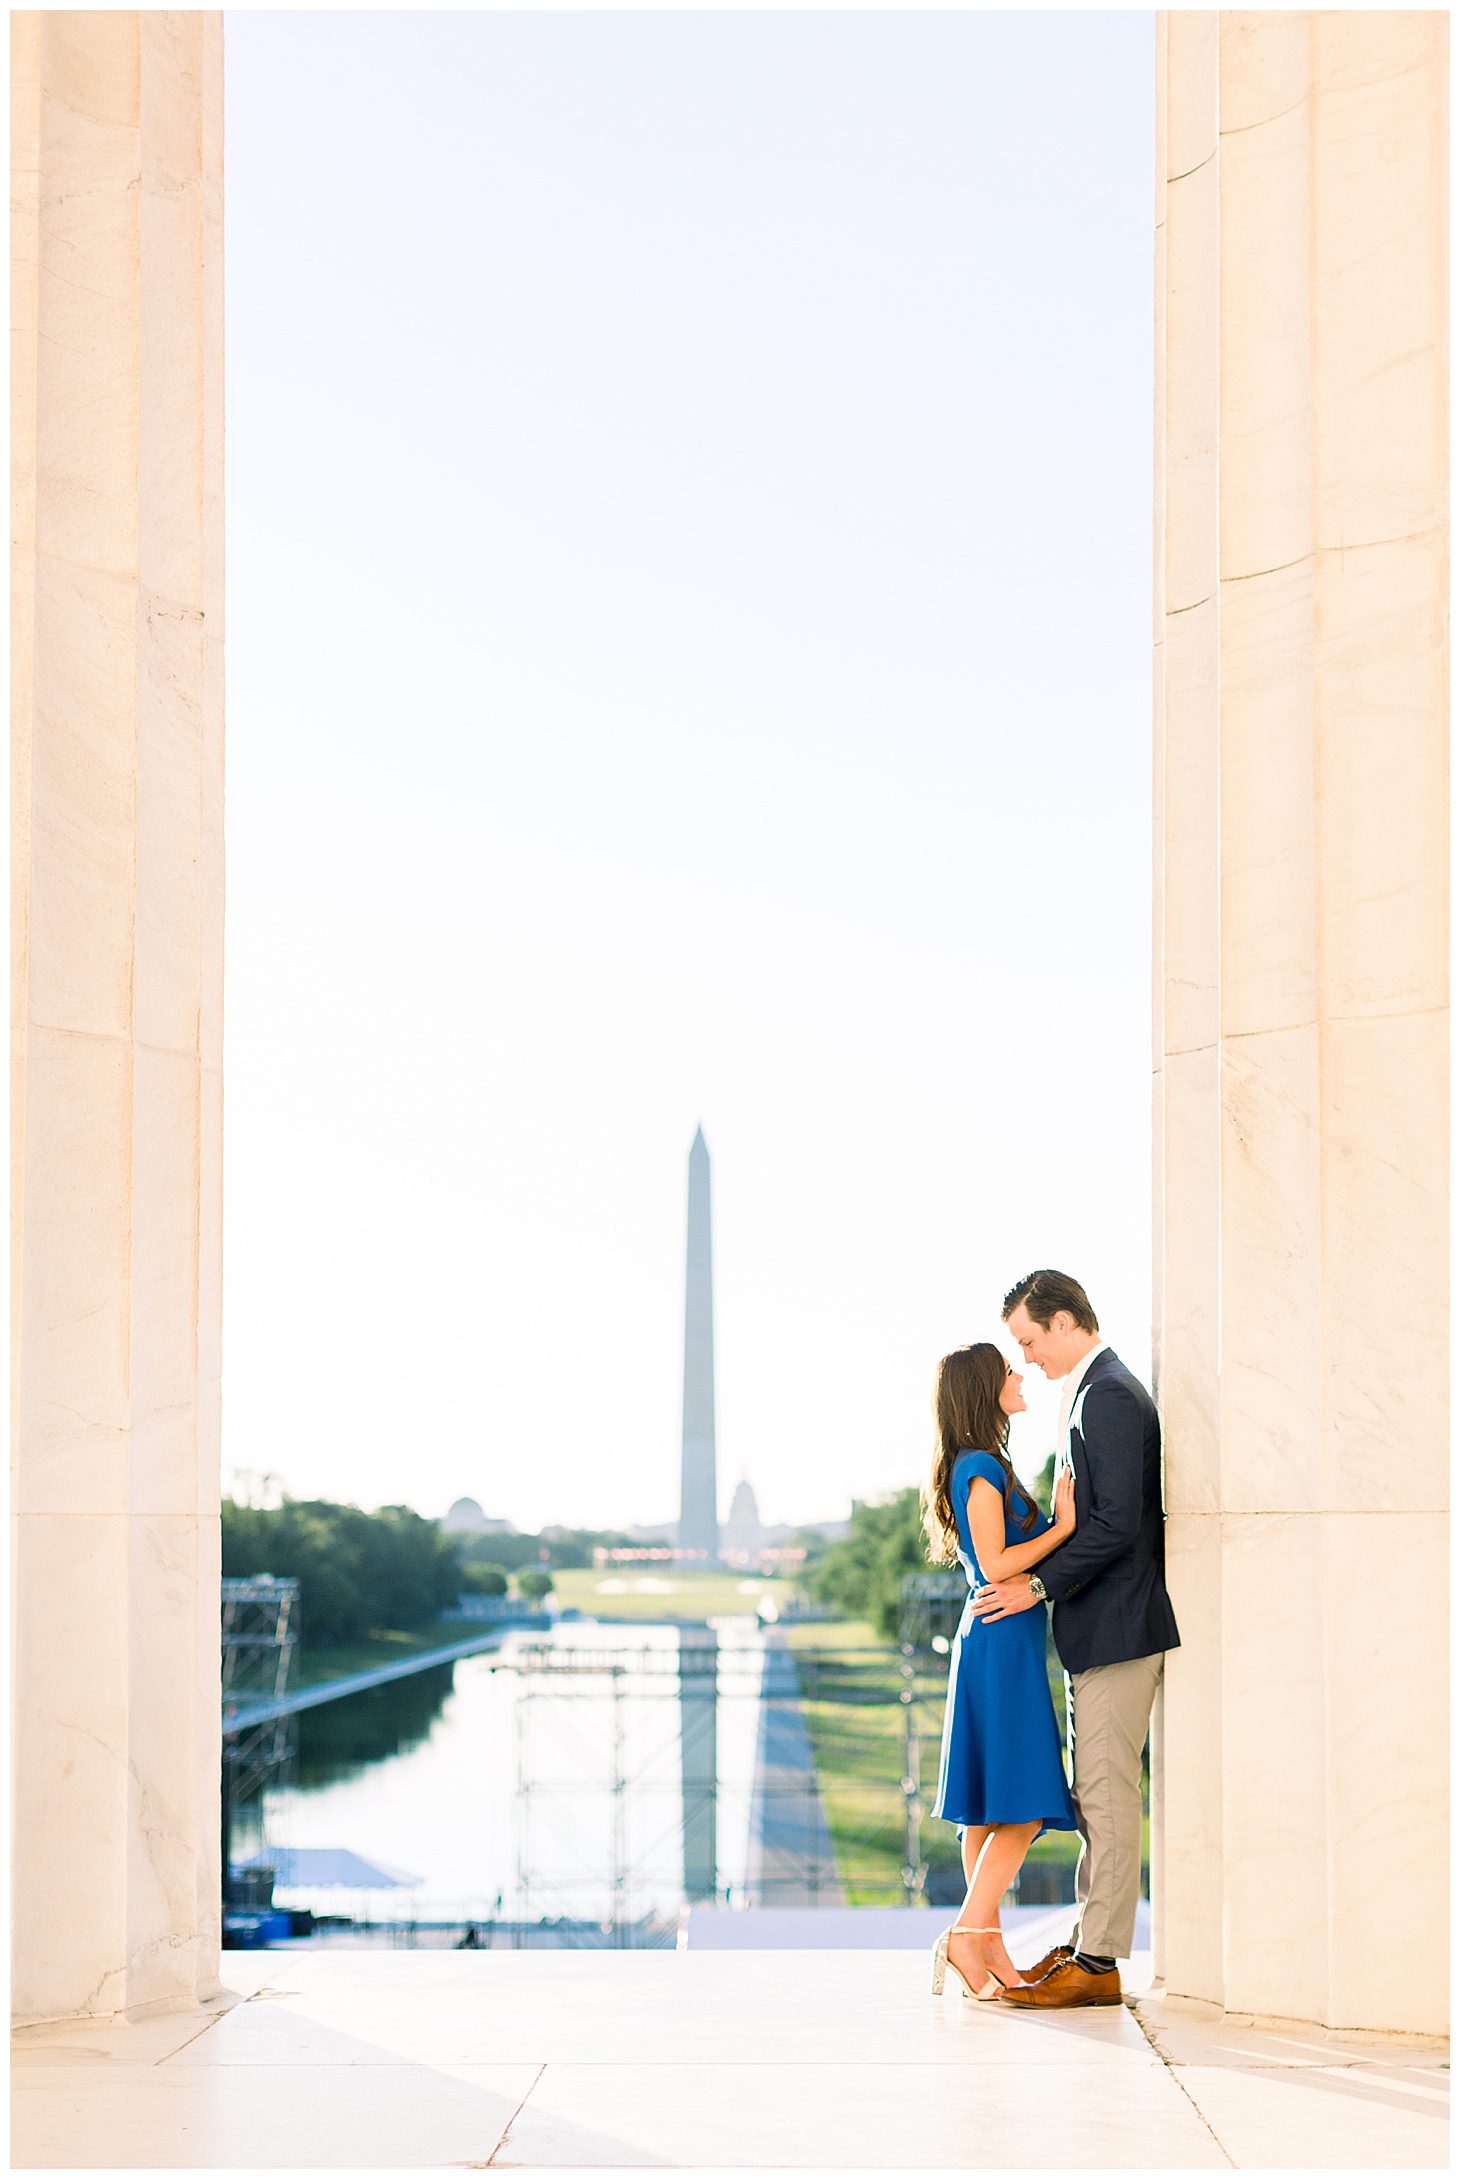 Portraits at Lincoln Memorial, Sarah Bradshaw Photography, Preppy Morning Engagement Session with Golden Light and Golden Retriever